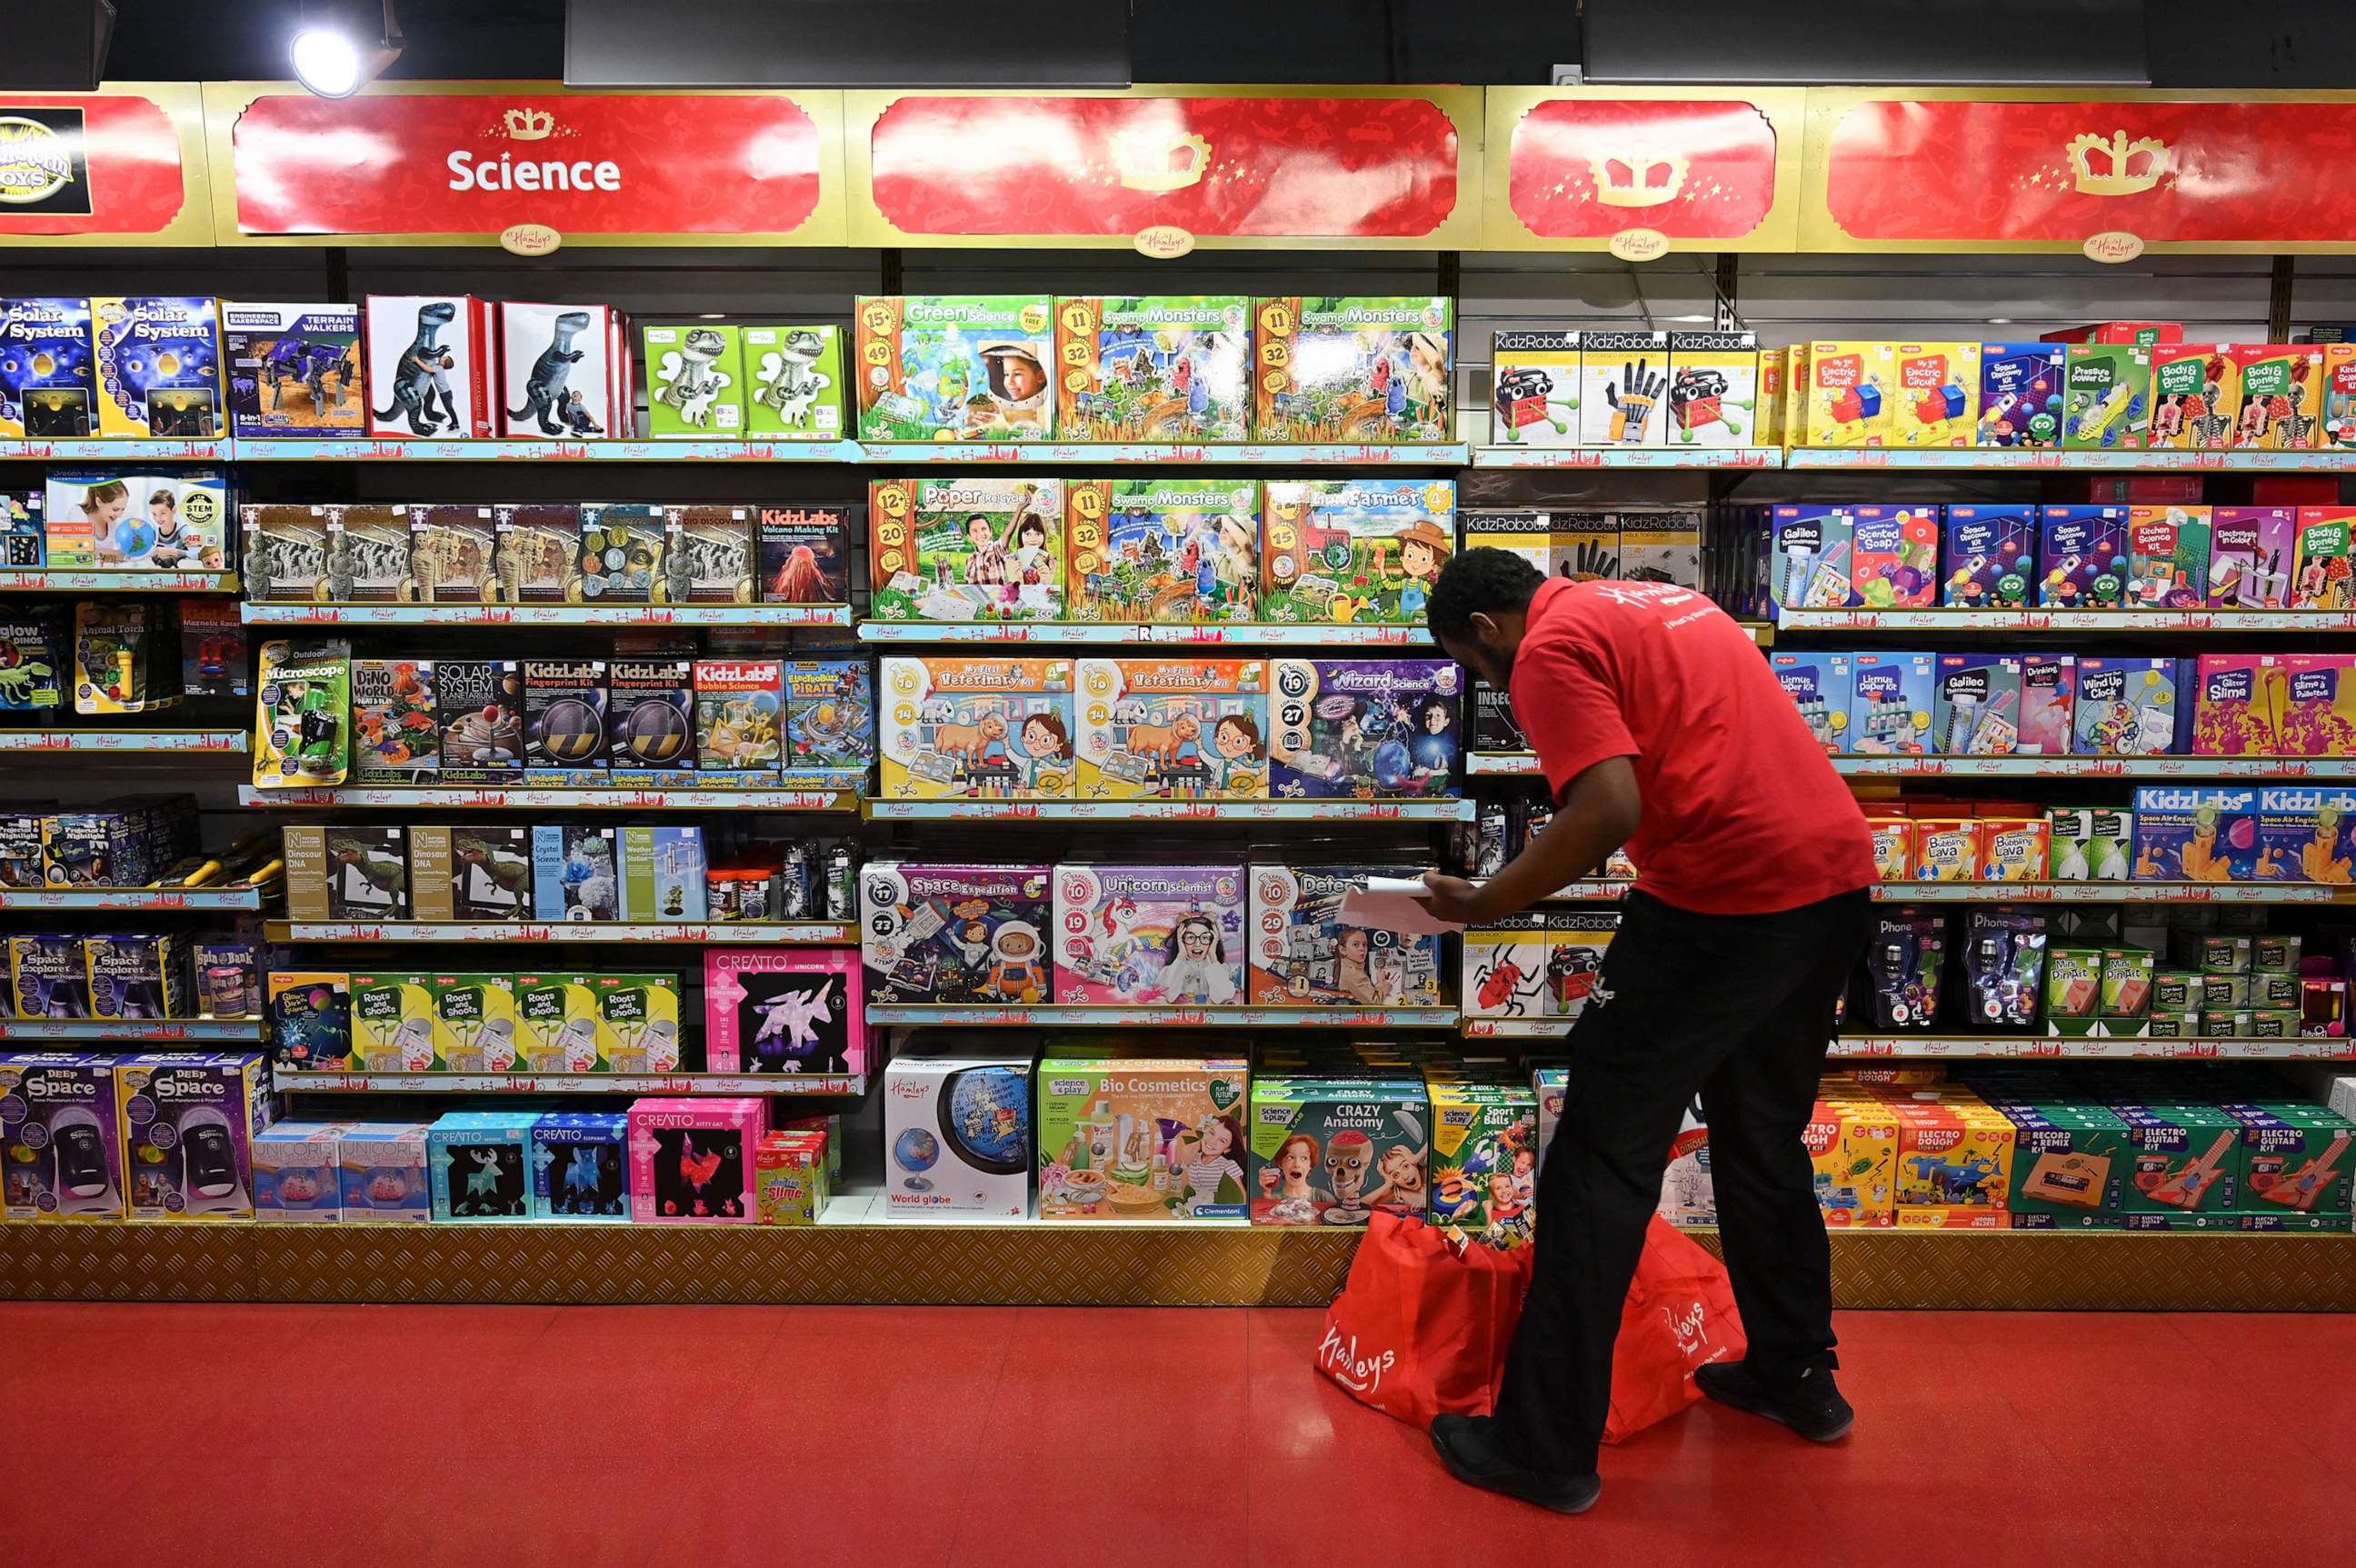 PHOTO: An employee arranges stock on the shelves at Hamley's toy store during a photo call in London, Oct. 14, 2021.